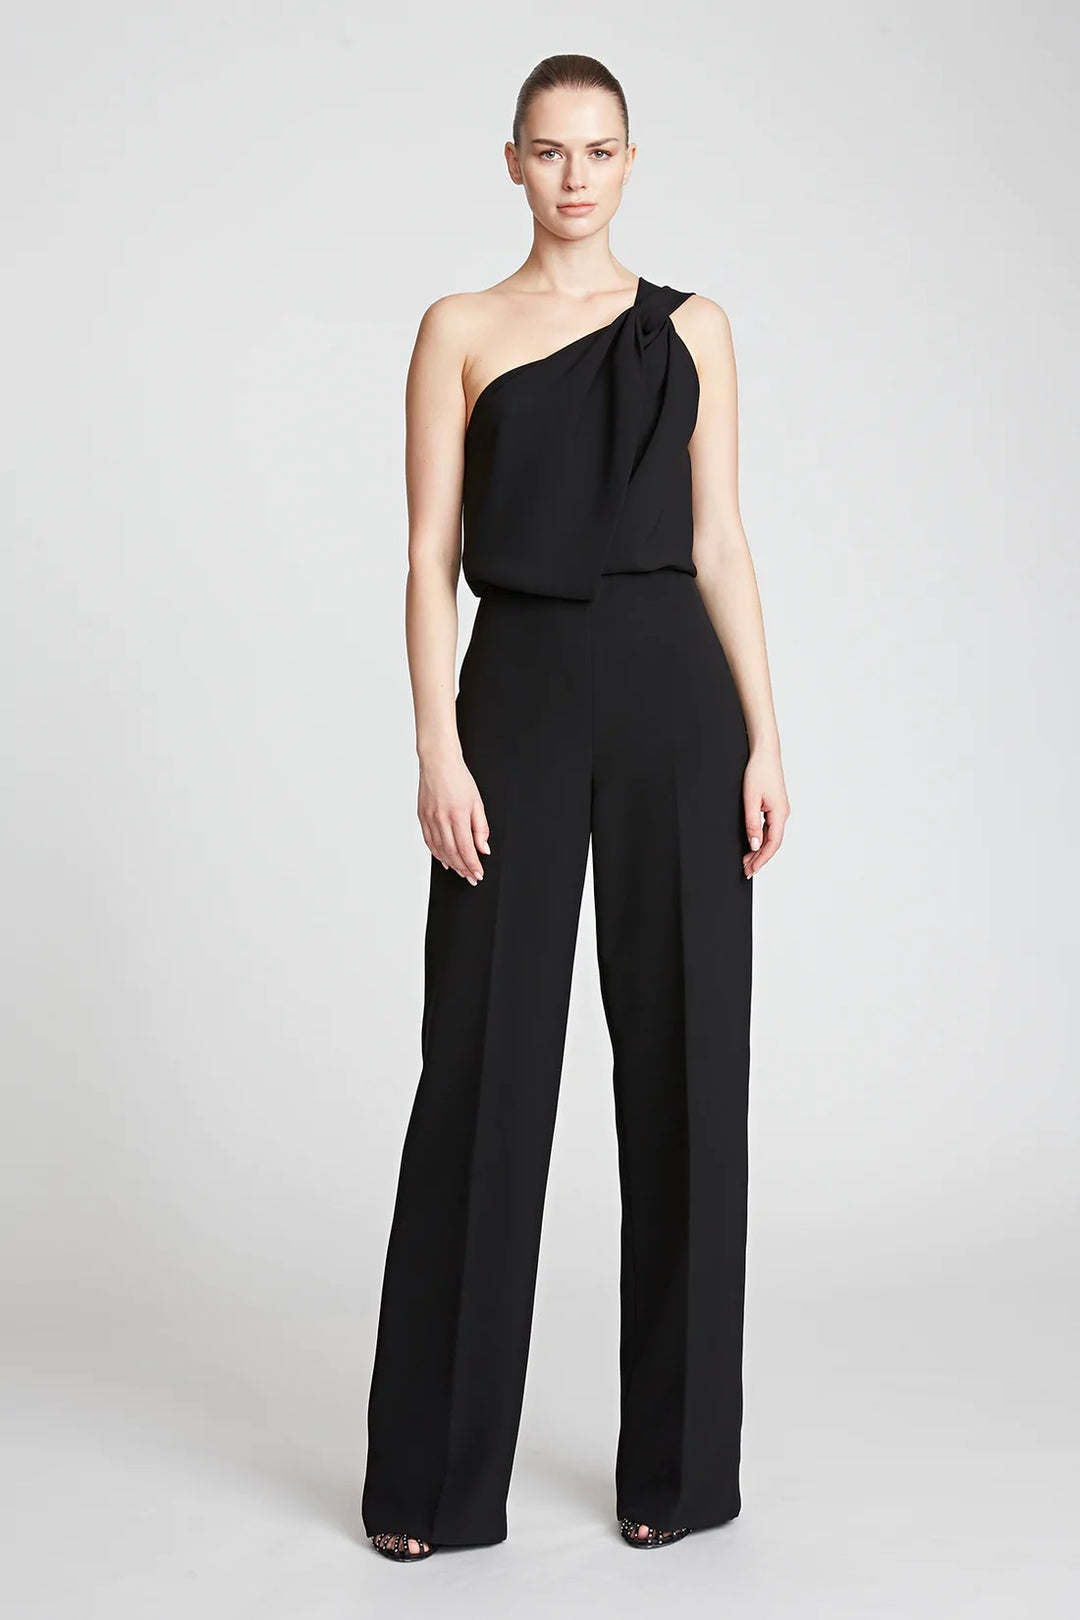 Love this jumpsuit style with slits and one of a kind color (gifted b